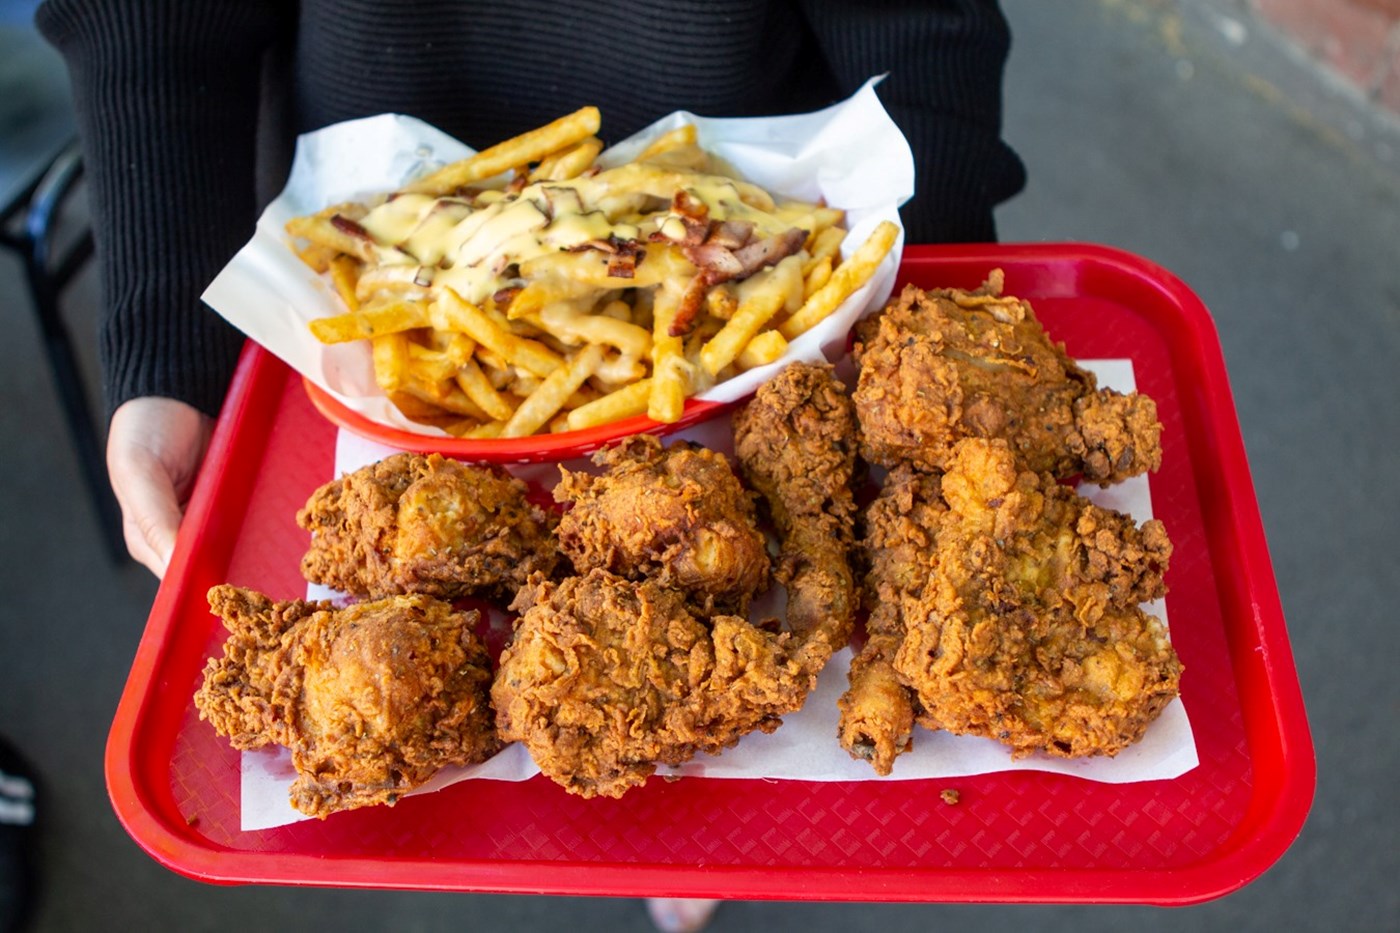 Sonny's Fried Chicken & Burgers